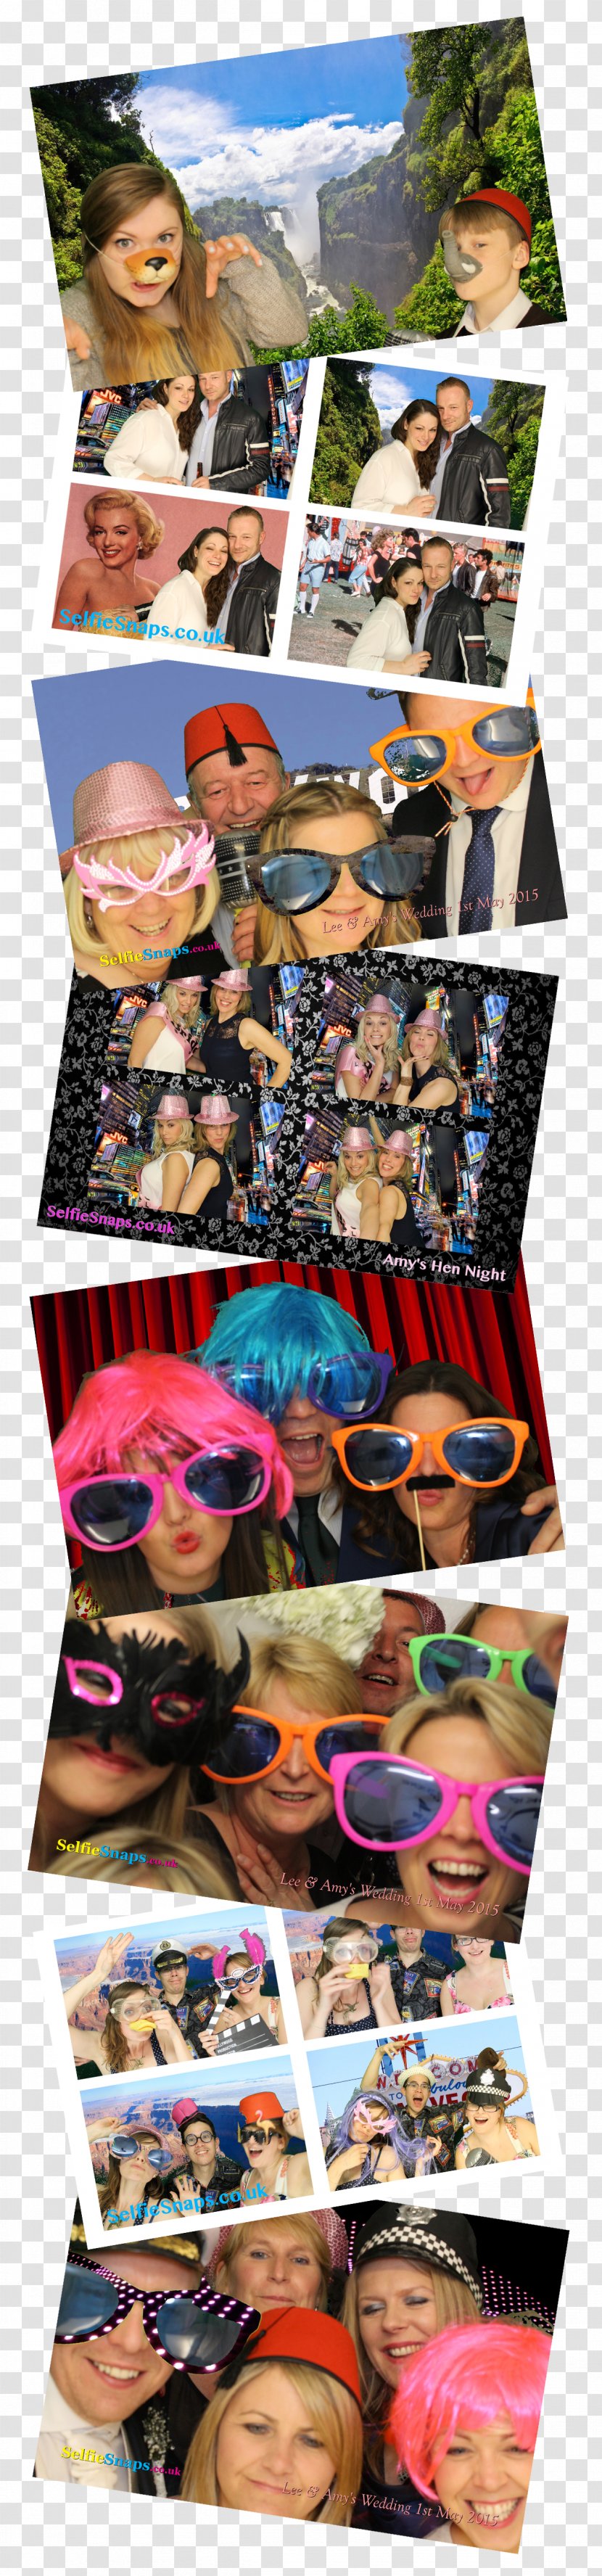 Photo Booth Photographer Photomontage Photography Transparent PNG